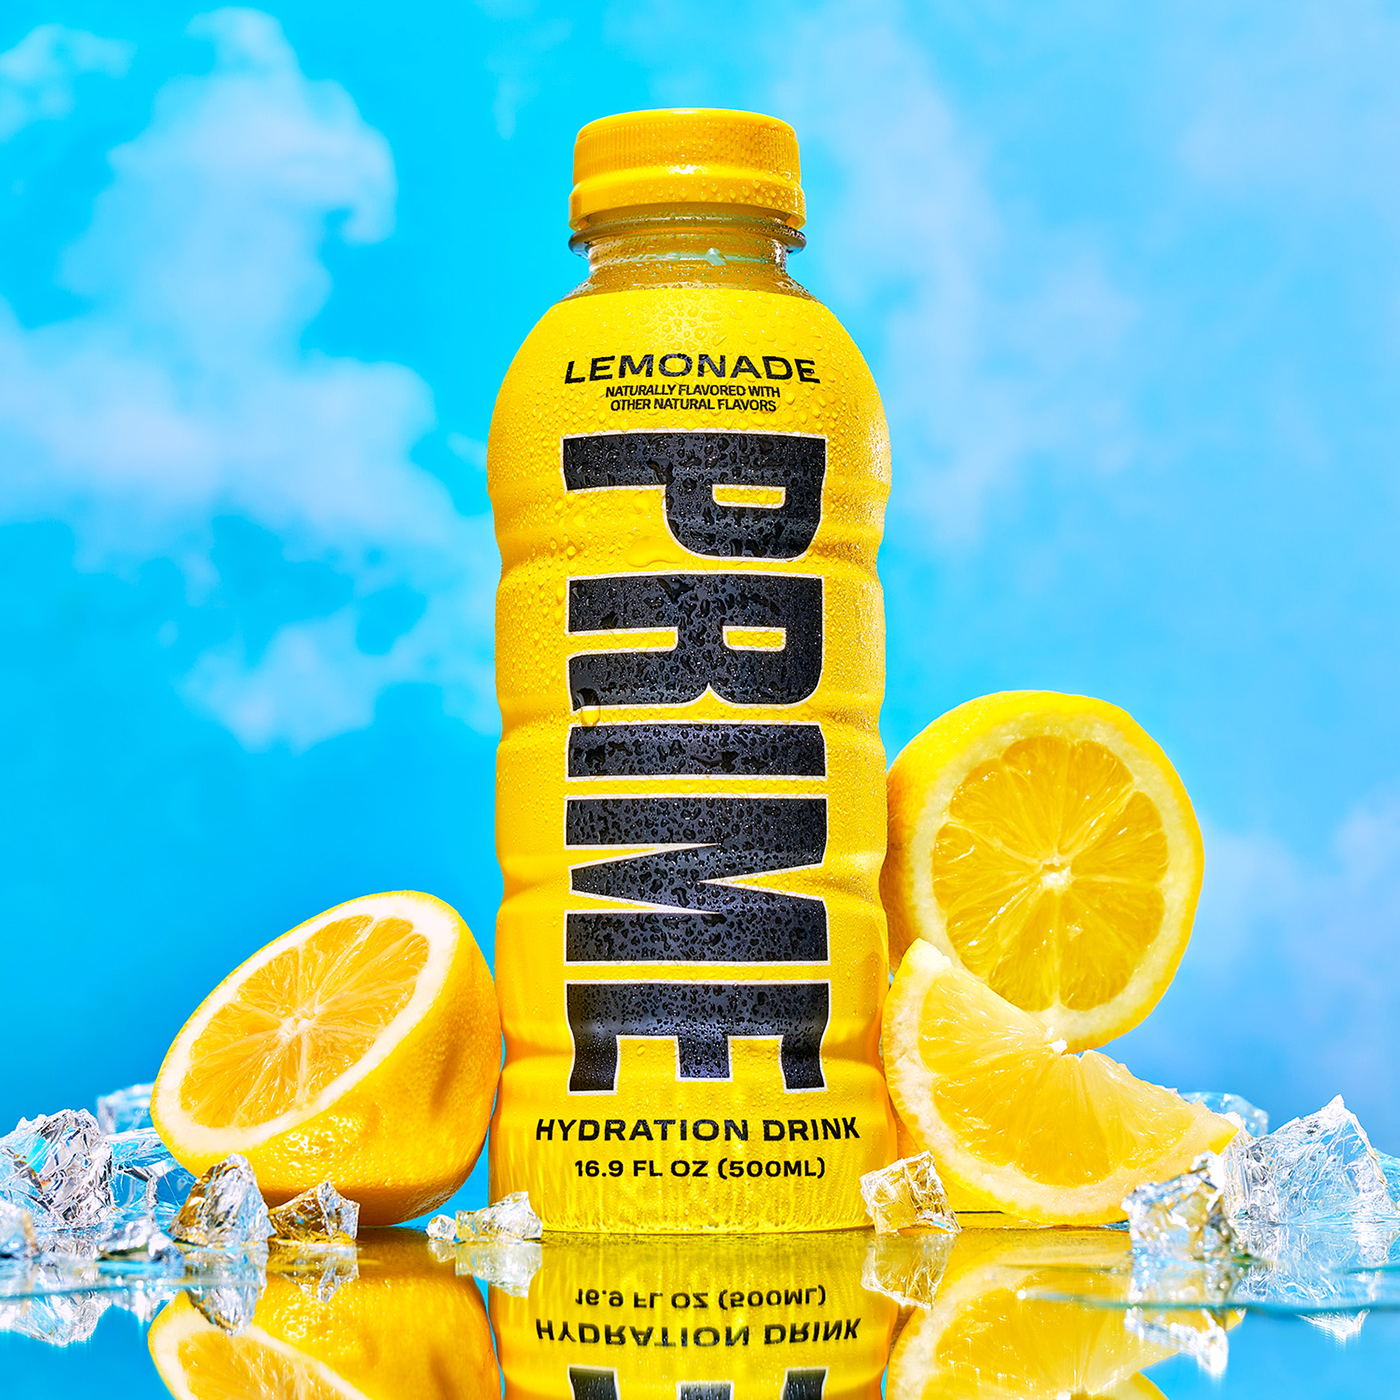 A display of Prime Hydration in flavor lemonade next to slices of lemons.